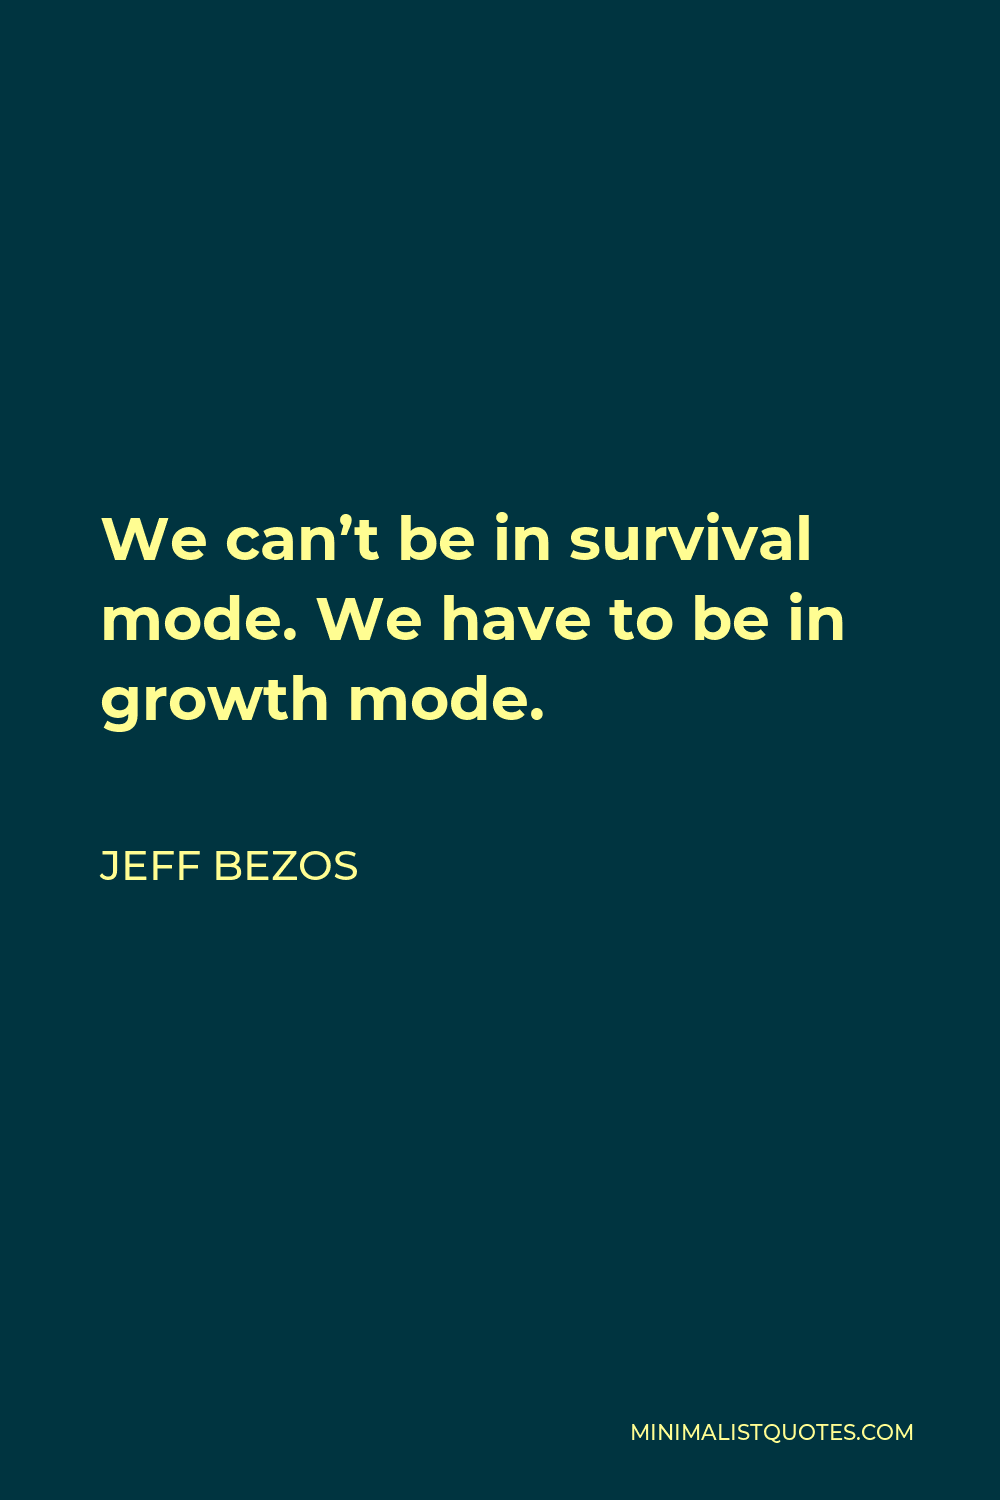 Jeff Bezos Quote - We can’t be in survival mode. We have to be in growth mode.